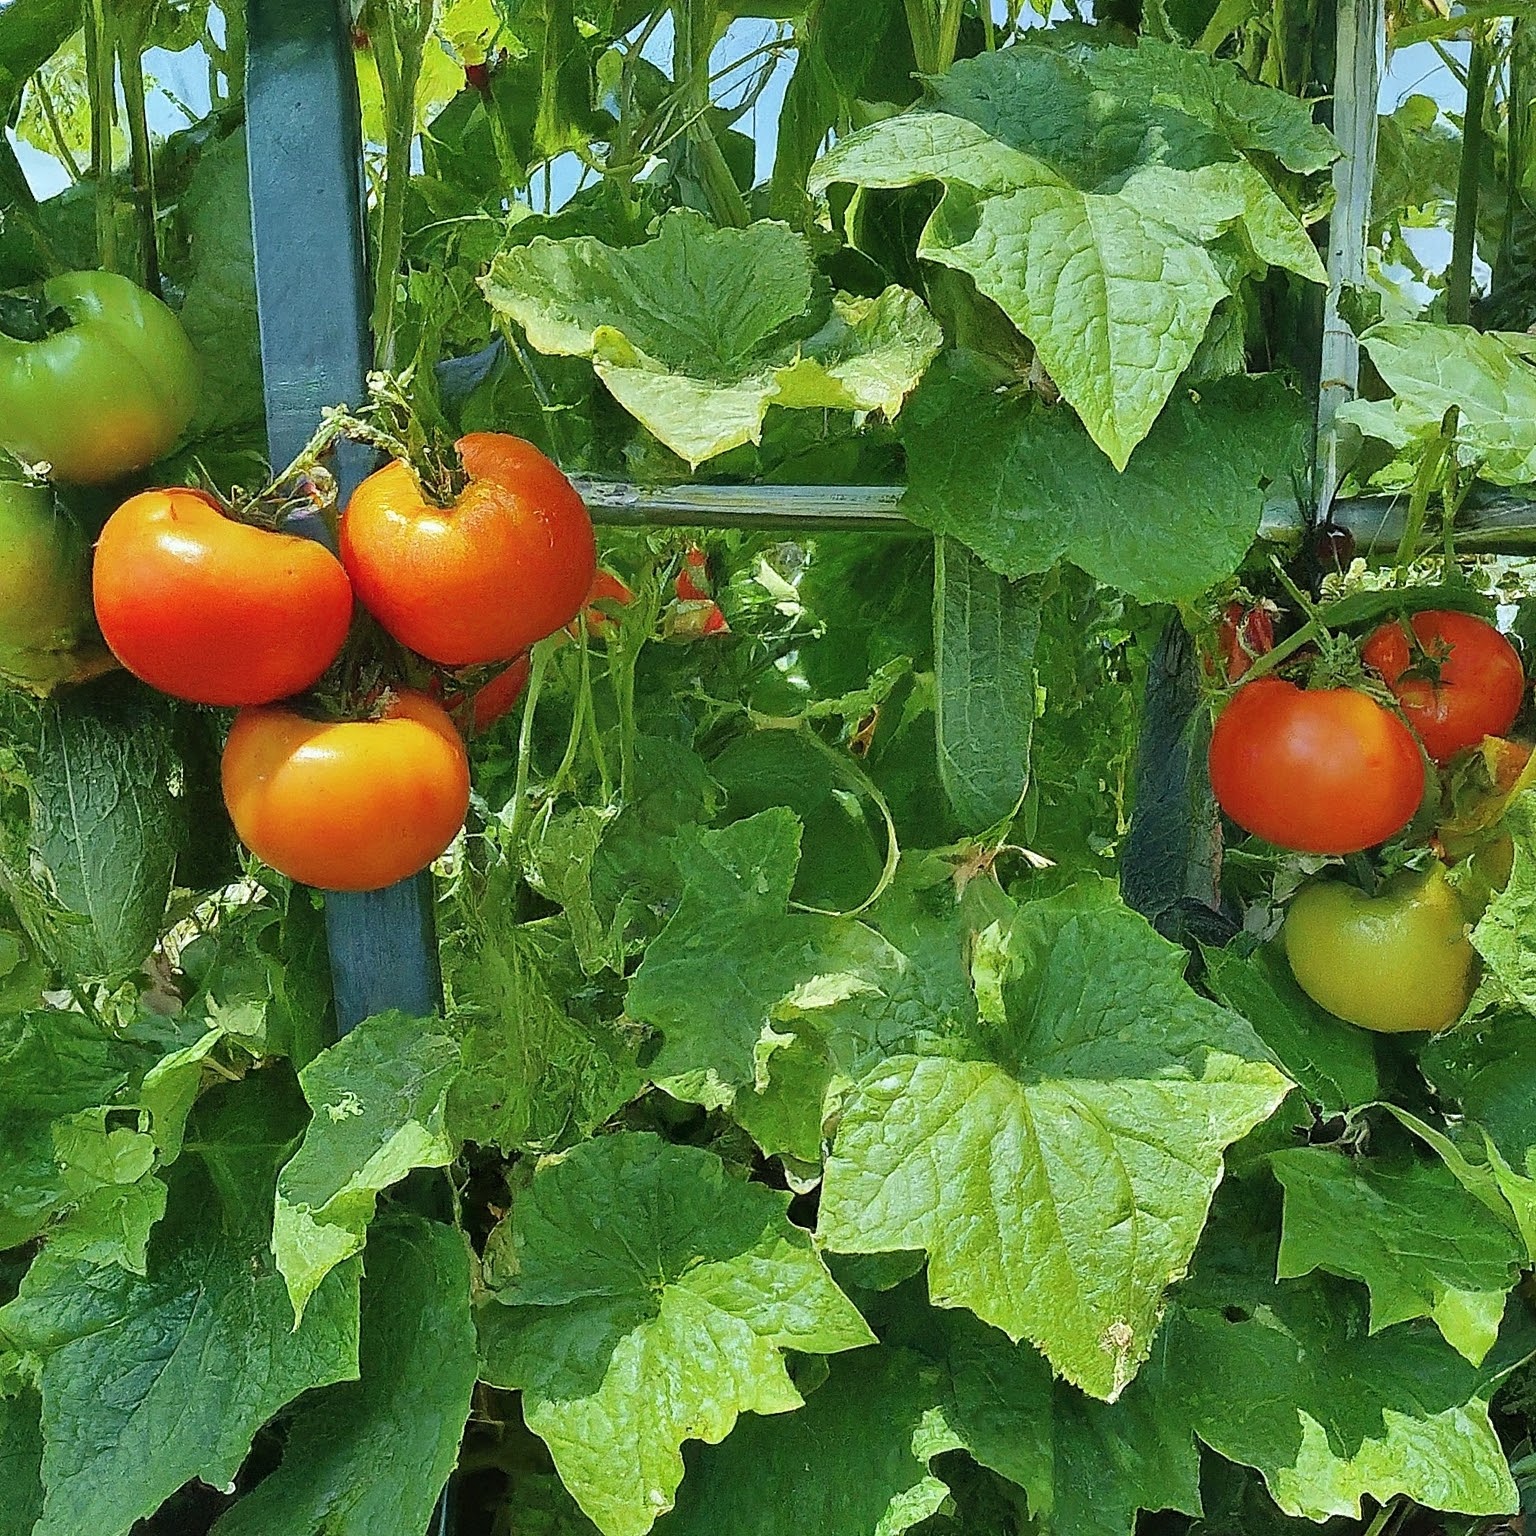 Can Cucumbers And Tomatoes Be Planted Next To Each Other?